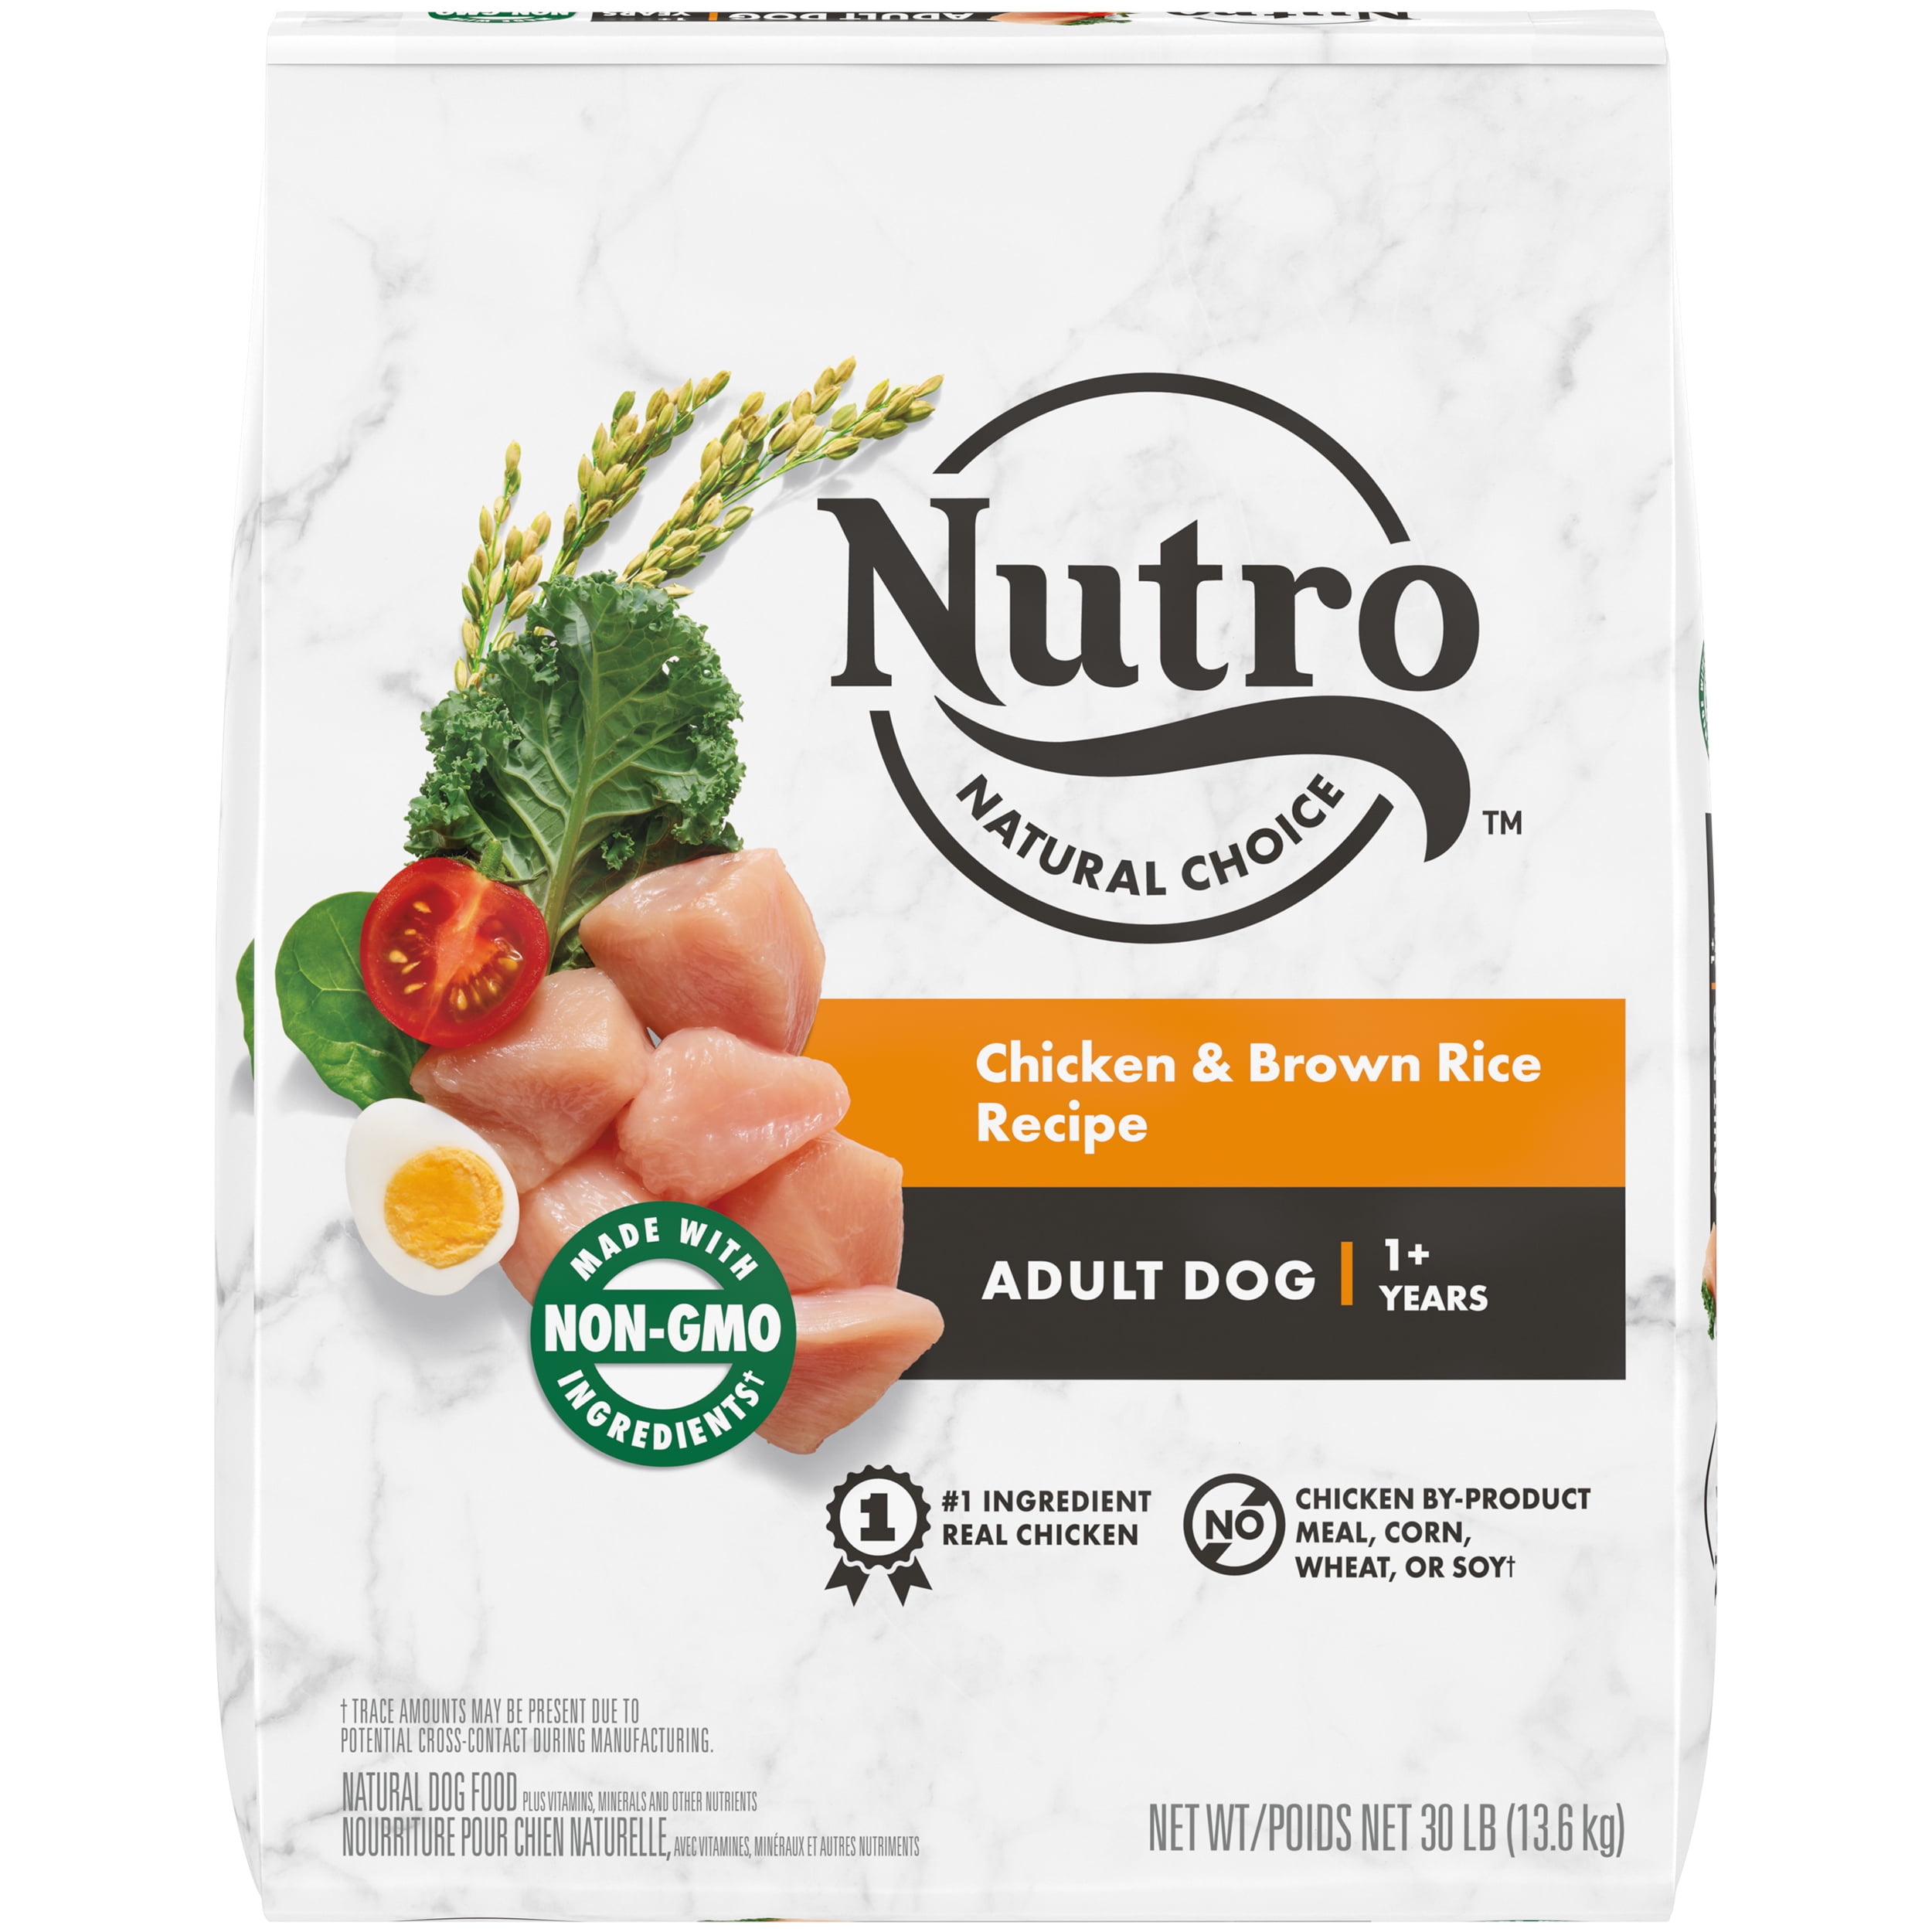 discover-the-best-nutro-natural-choice-dog-food-top-10-picks-review